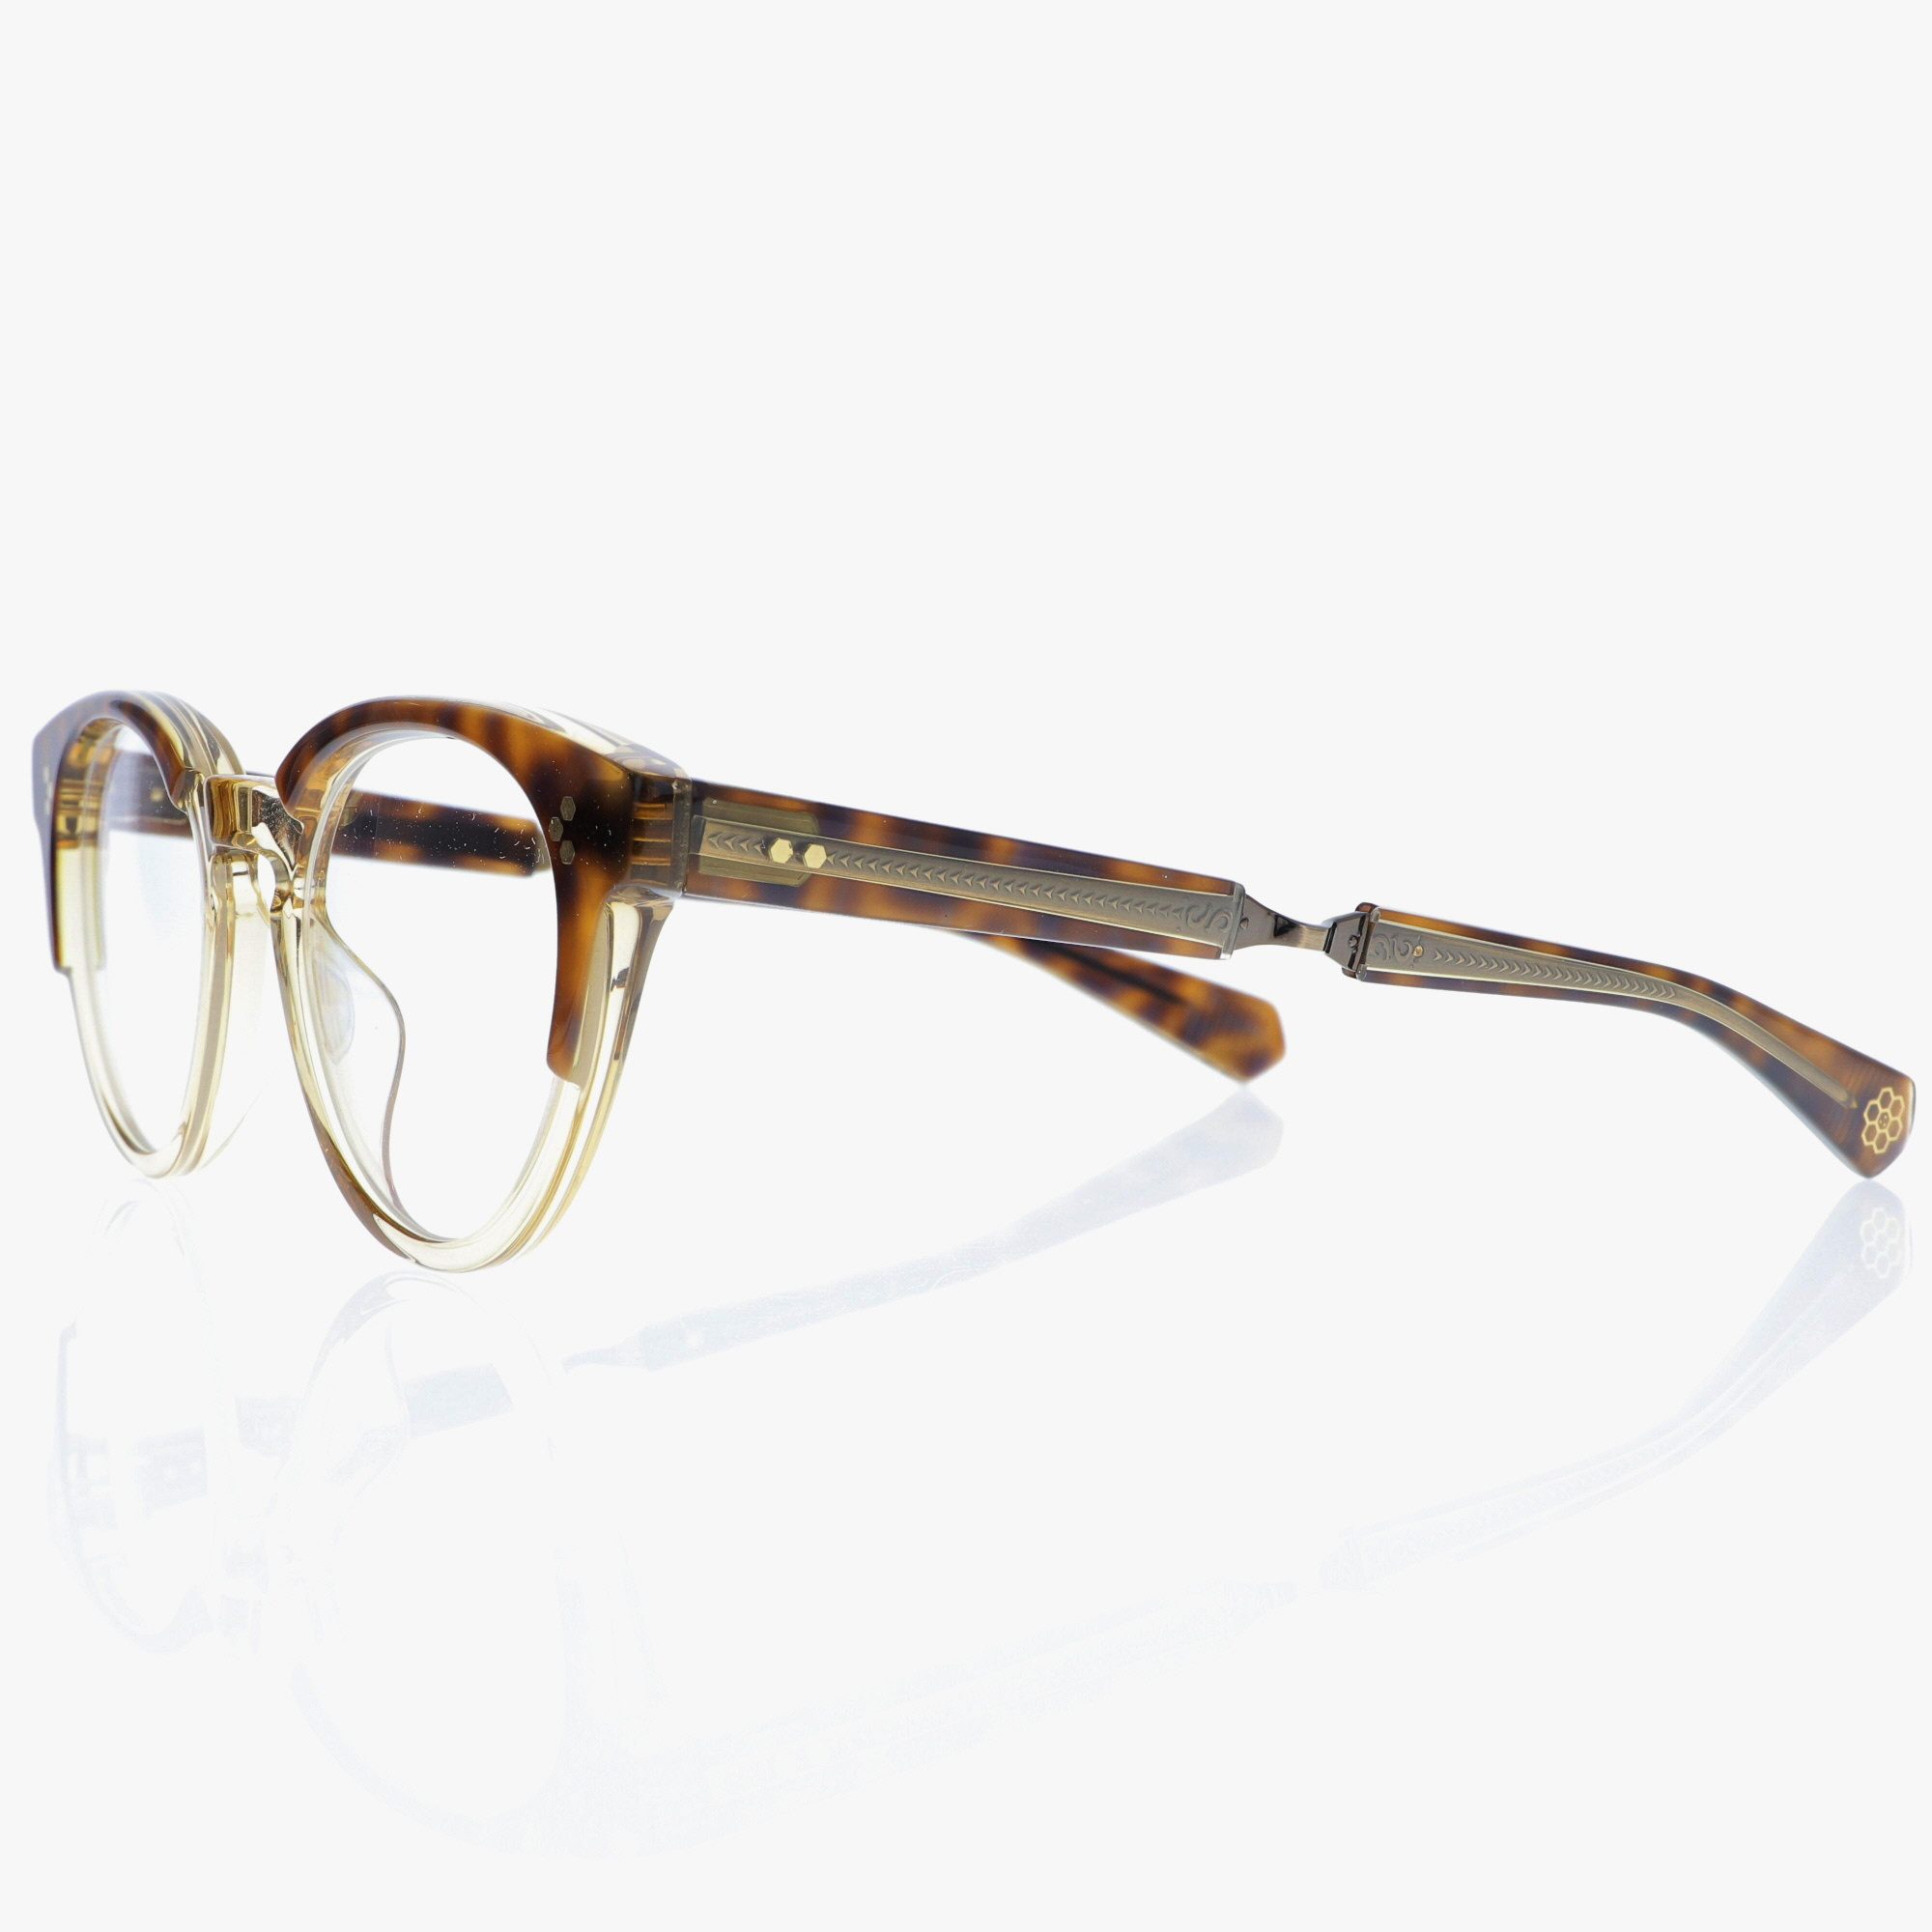 MR. LEIGHT / AUDREY C / CROWN SHELL - ANTIQUE GOLD